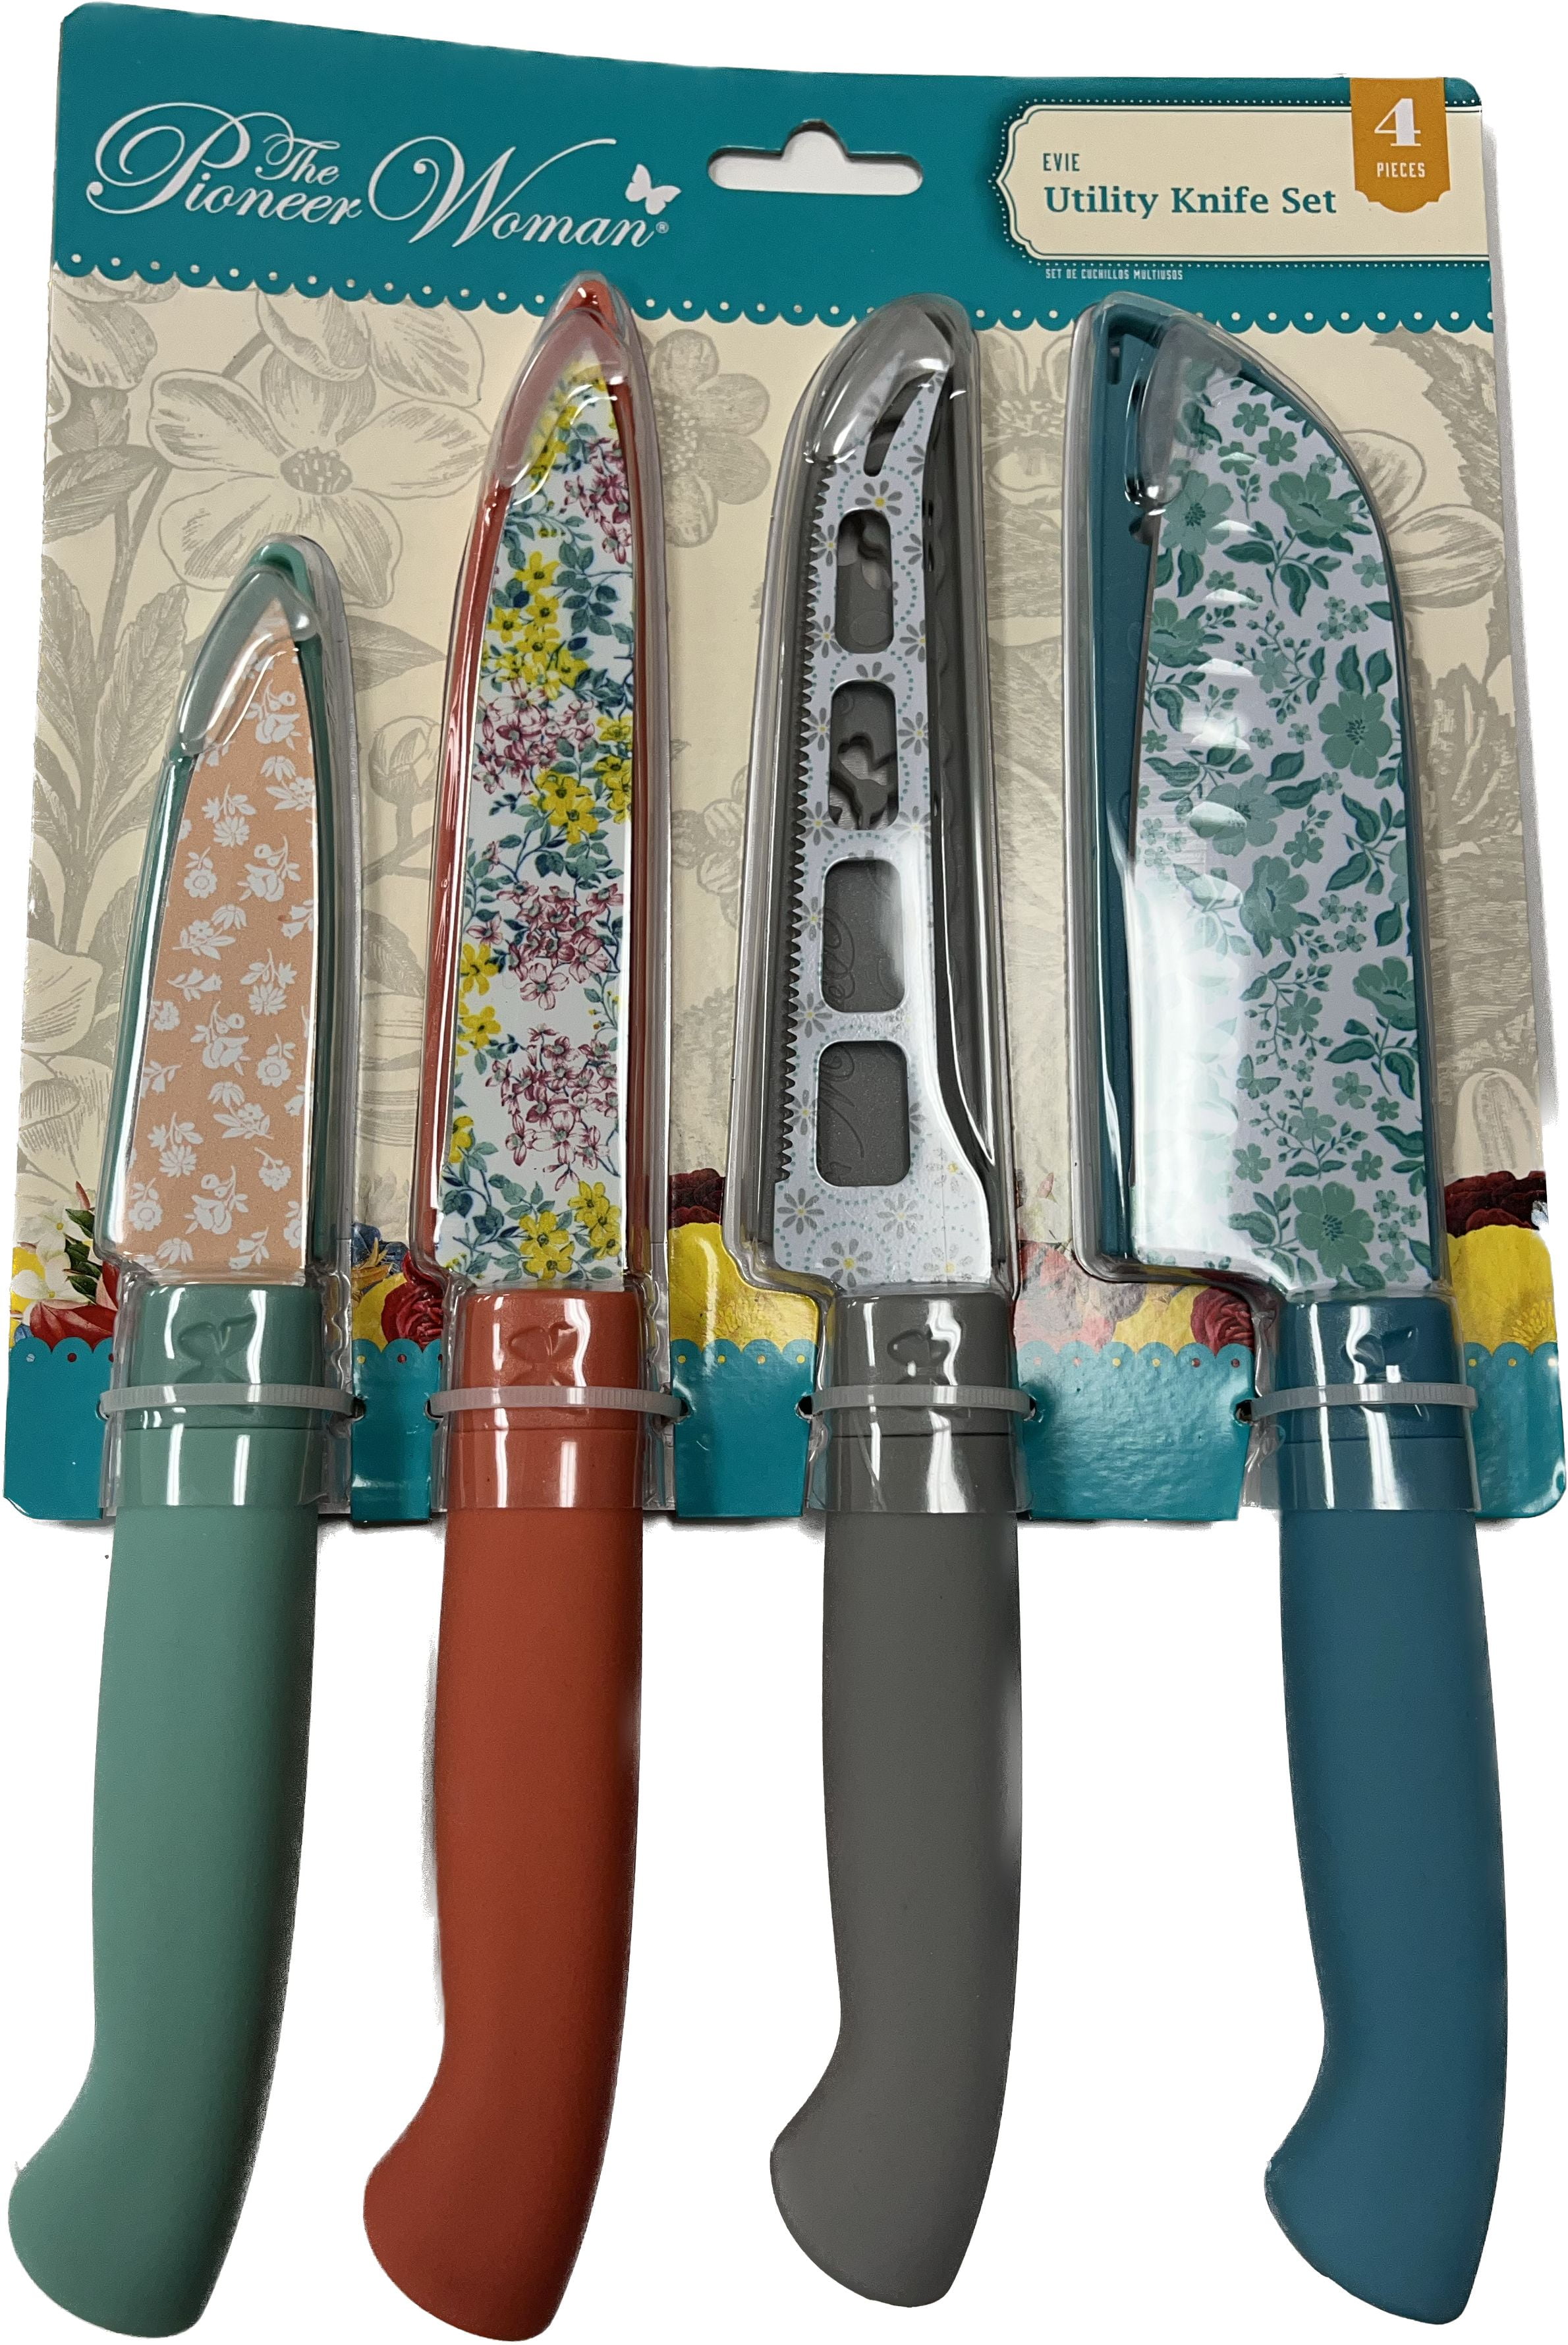 Everythingsouvenirs__ (PBD 0313) on X: Our Kitchen Knife Set has